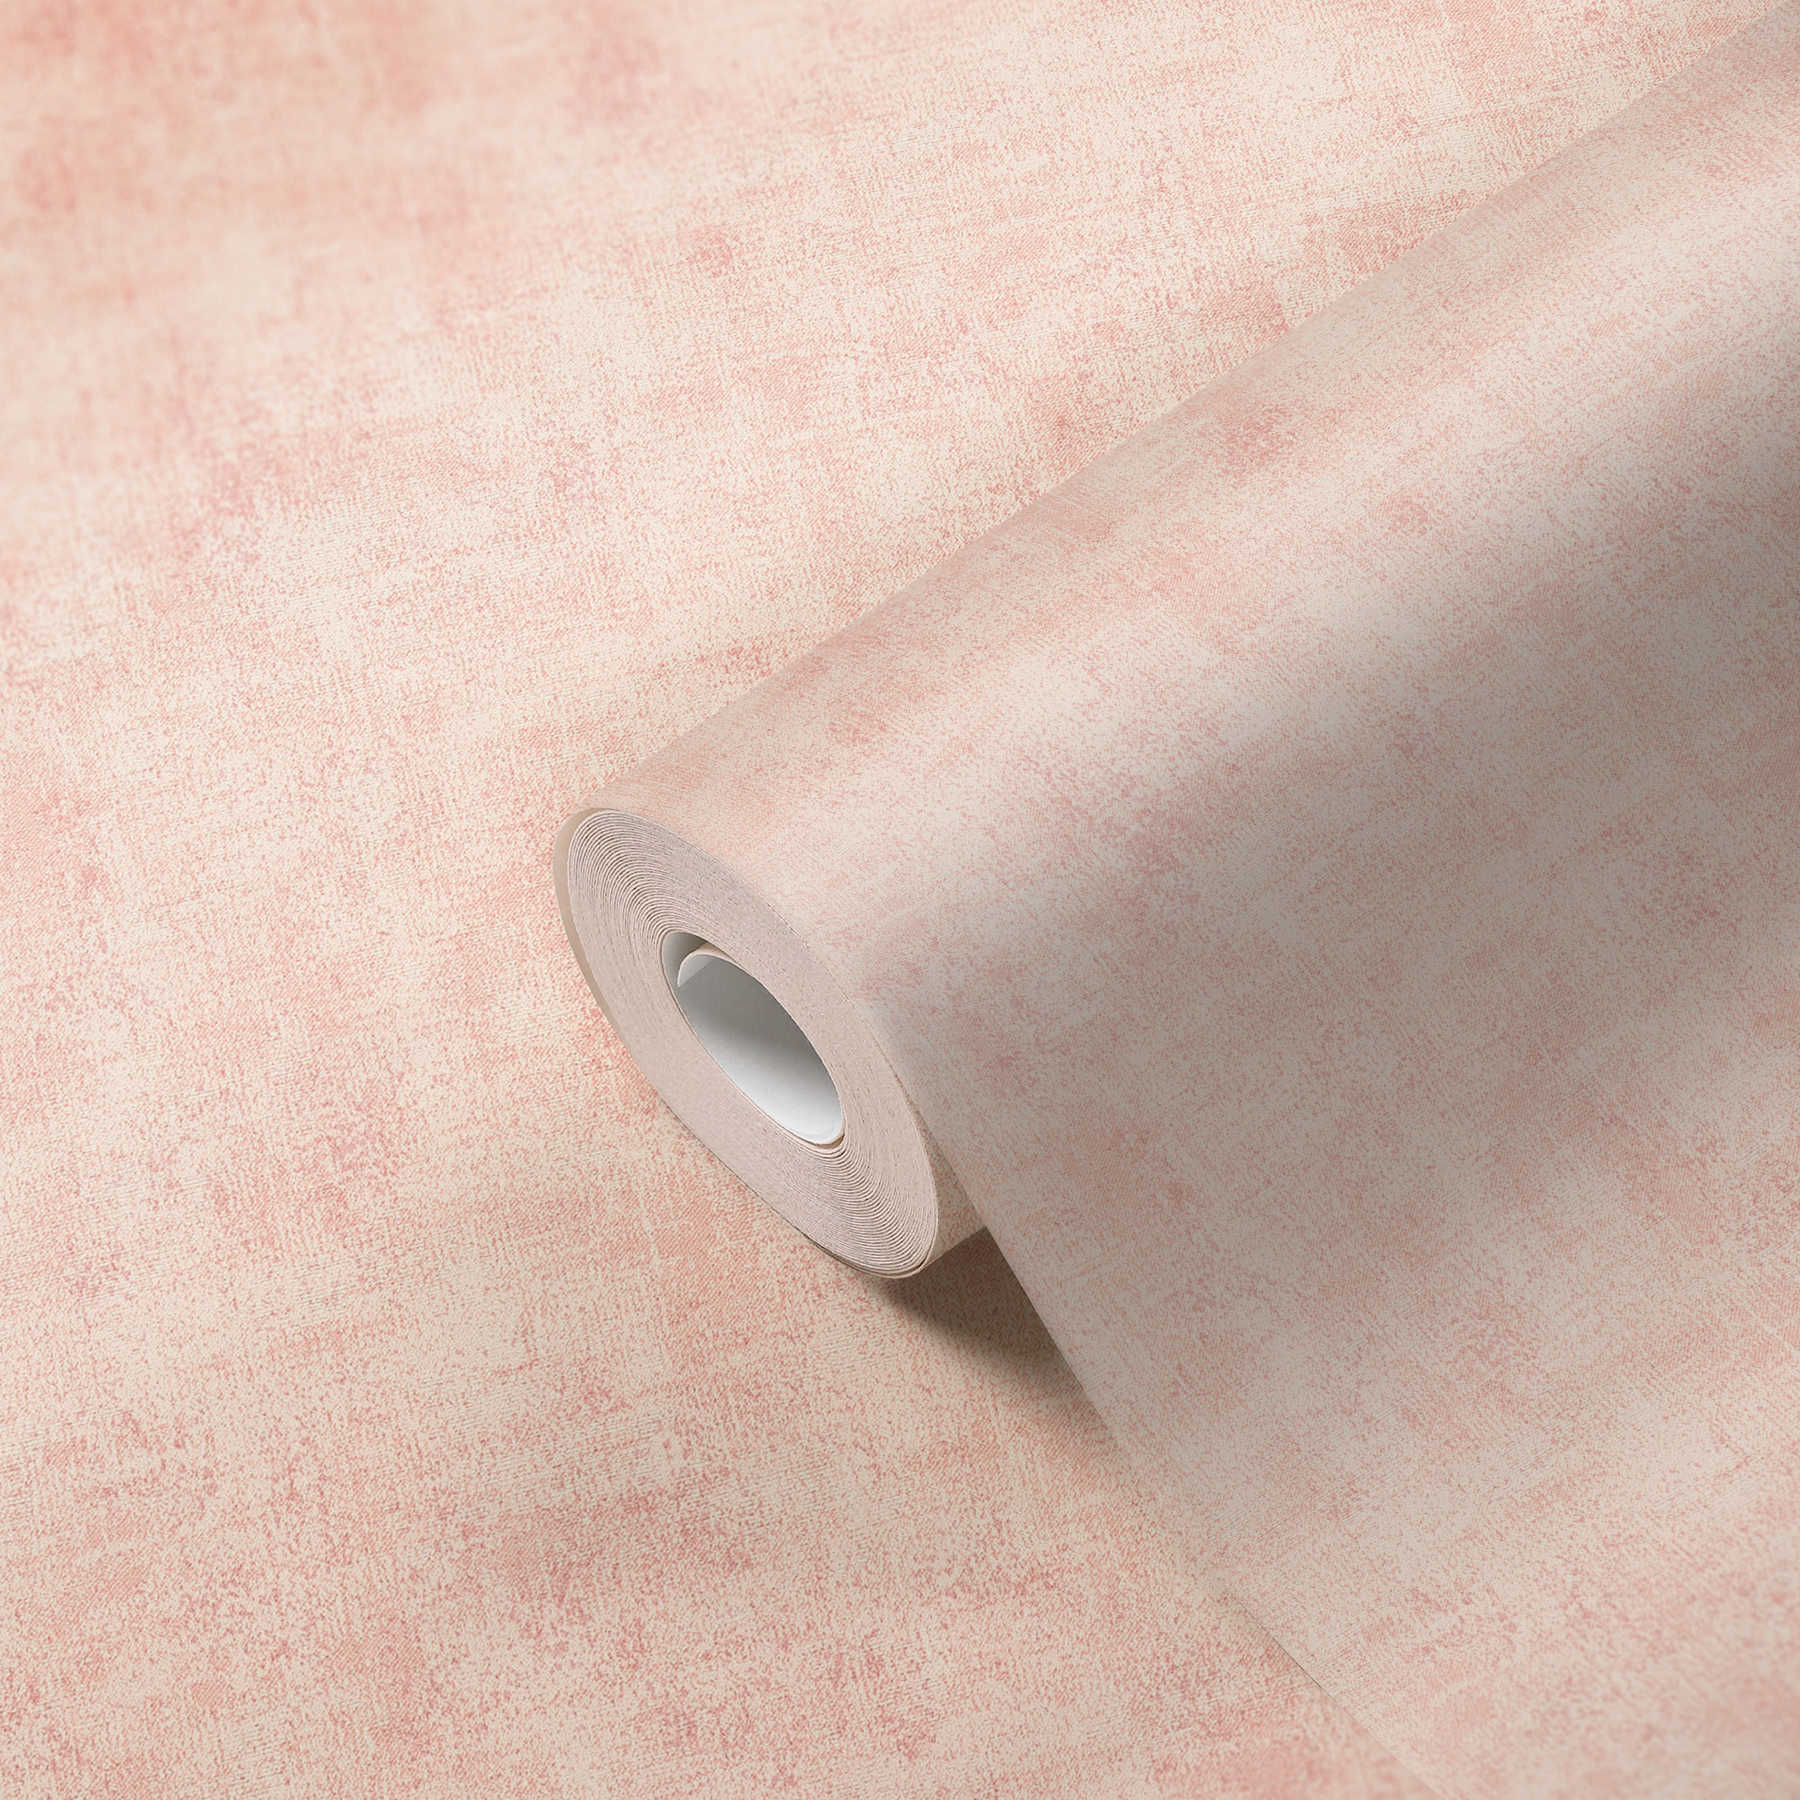             Plain wallpaper with discreet structure look - pink
        